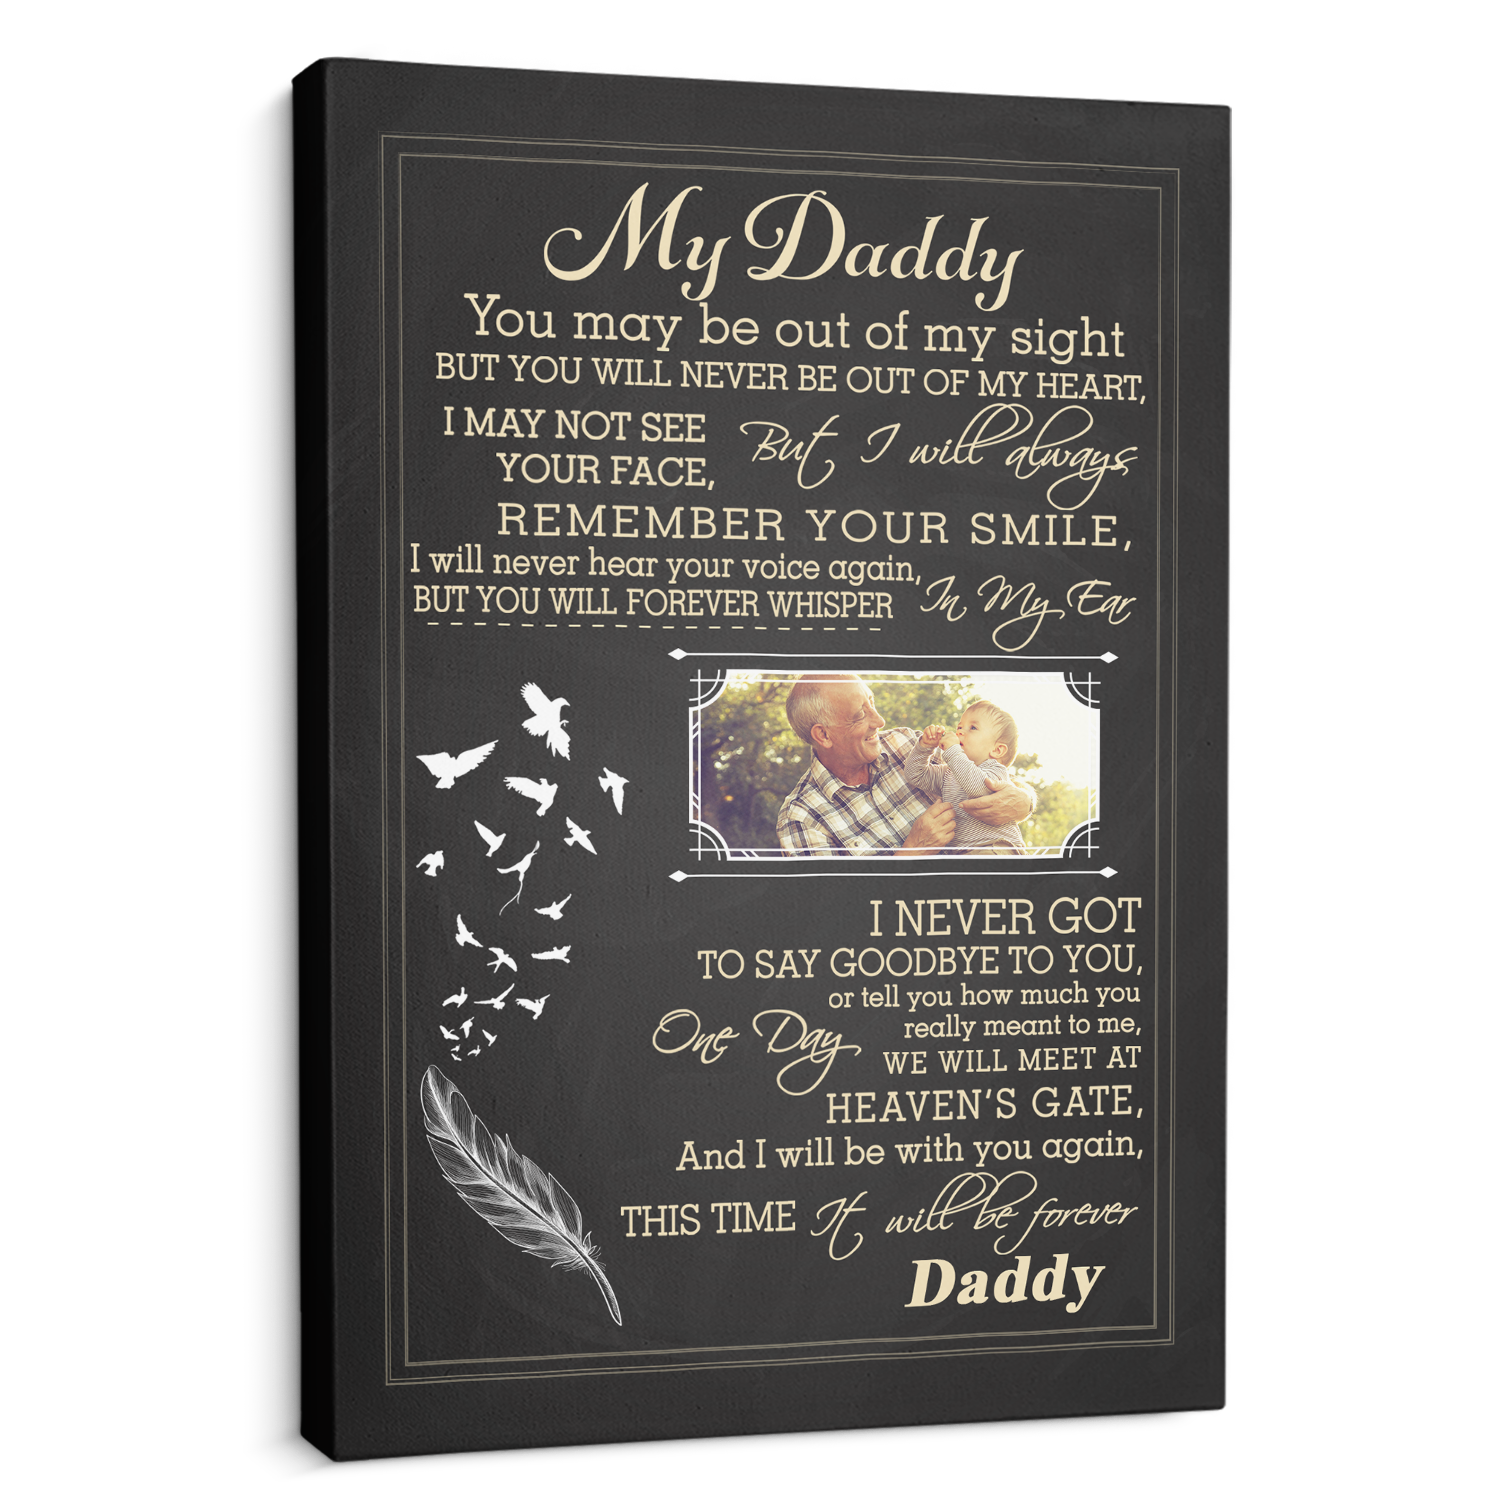 My Daddy, I Never Got To Say Goodbye To You, Custom Photo Canvas Art Print